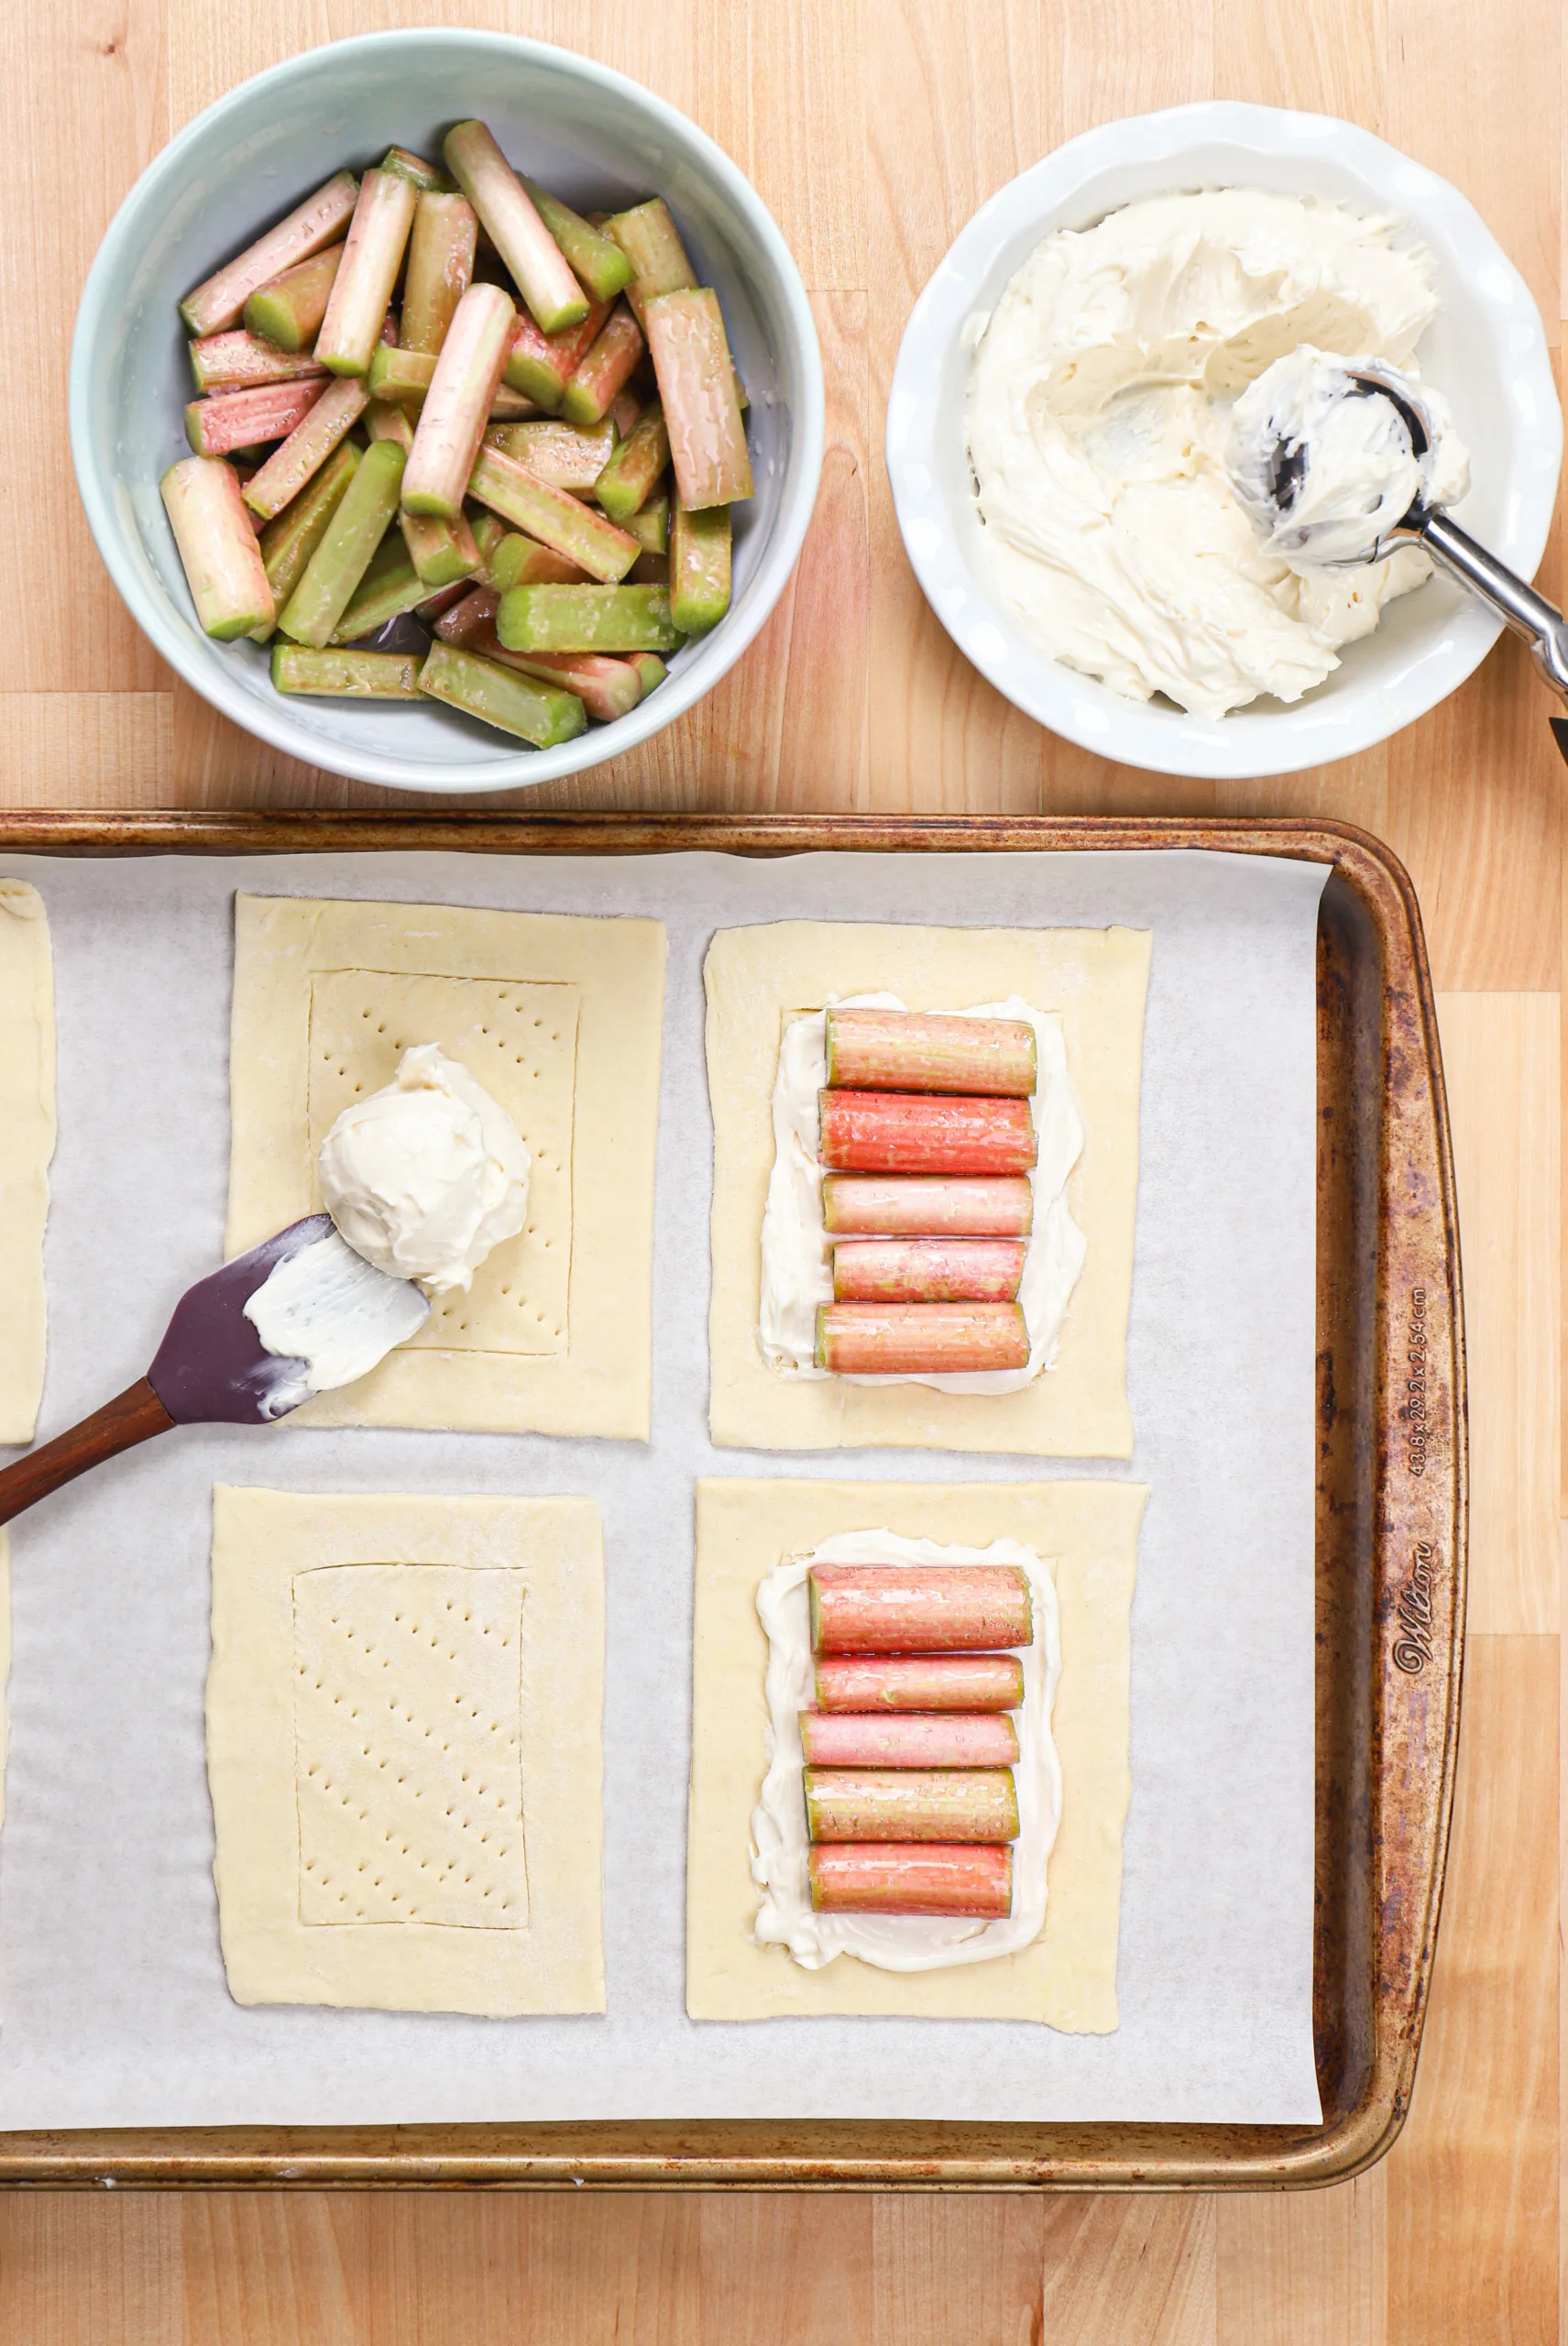 Pieces of puff pastry getting topped with cream cheese and pieces of rhubarb.